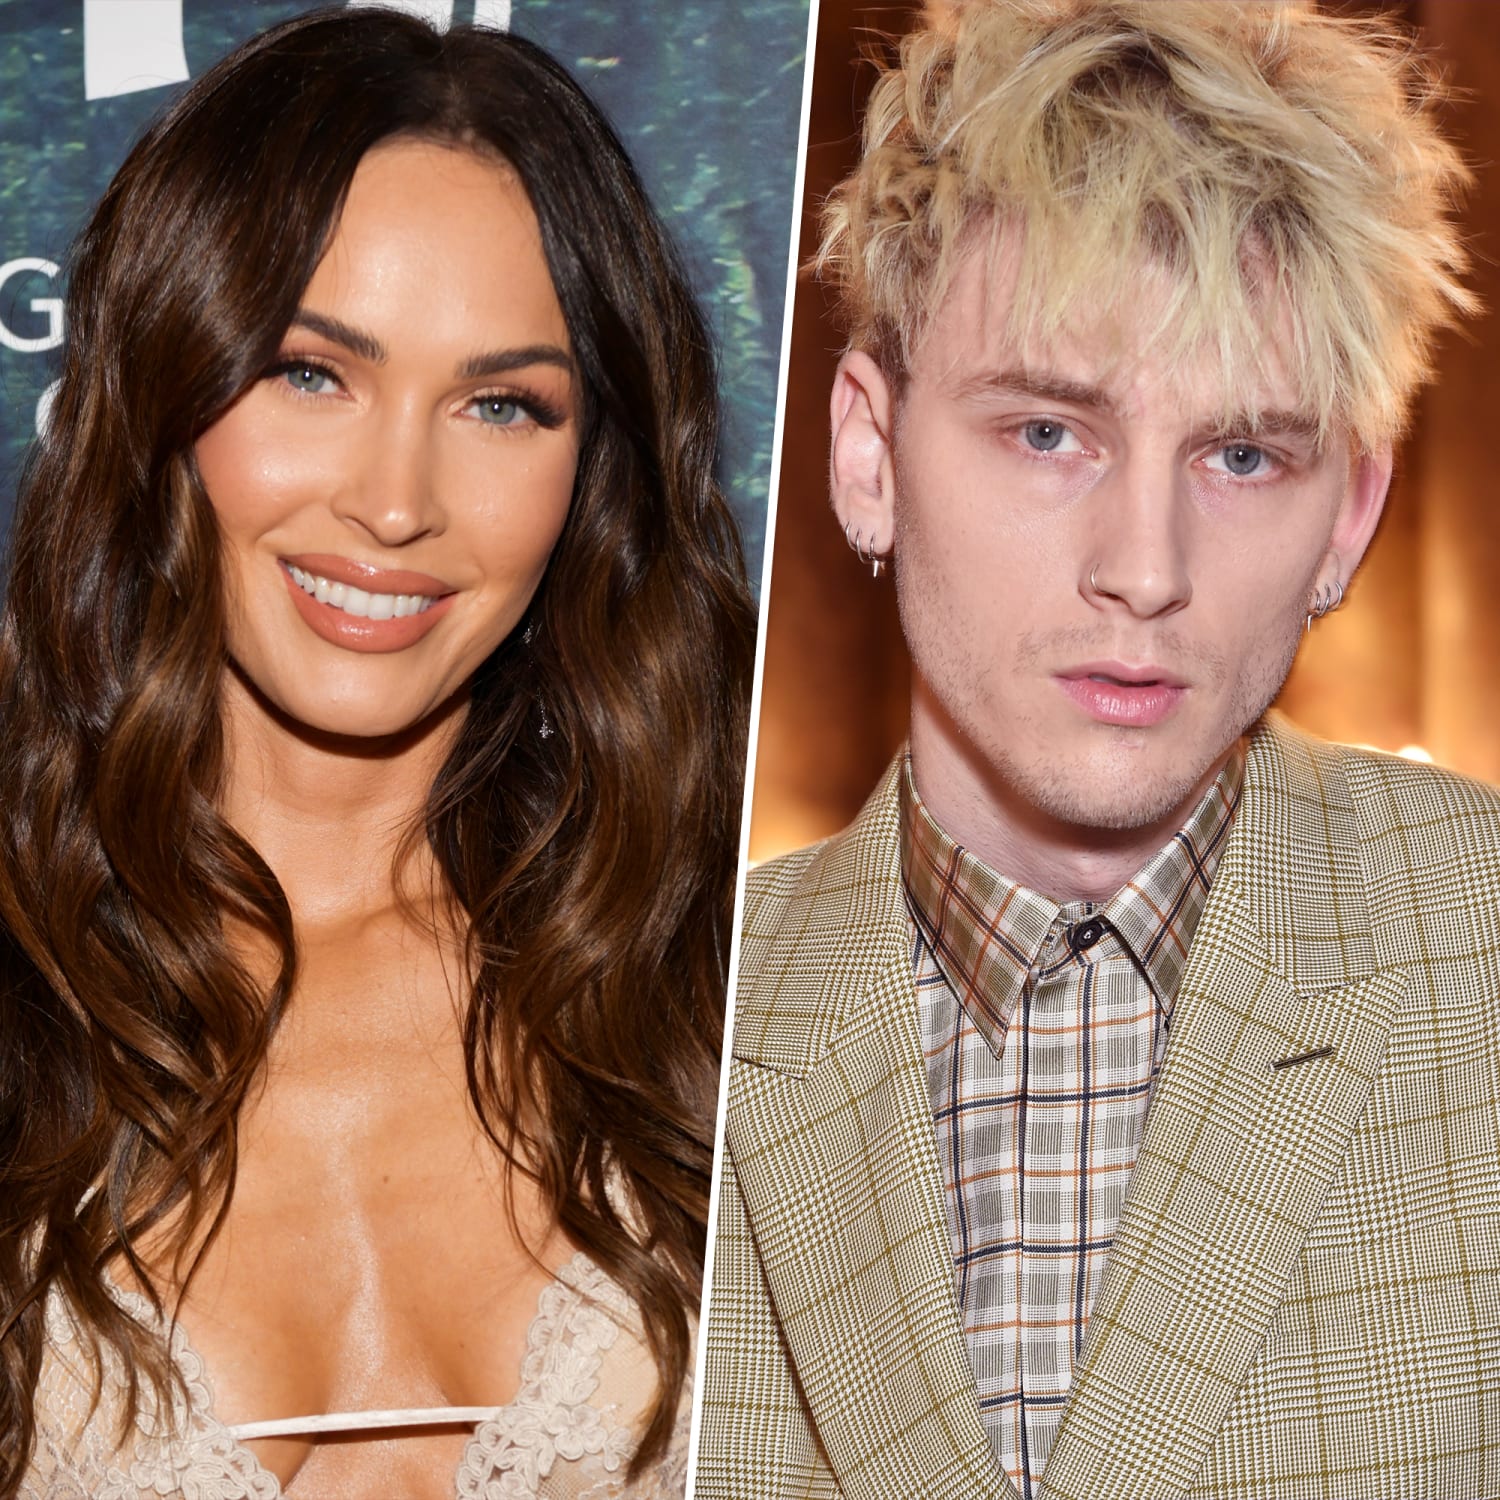 Megan Fox And Machine Gun Kelly Open Up About Their Romance